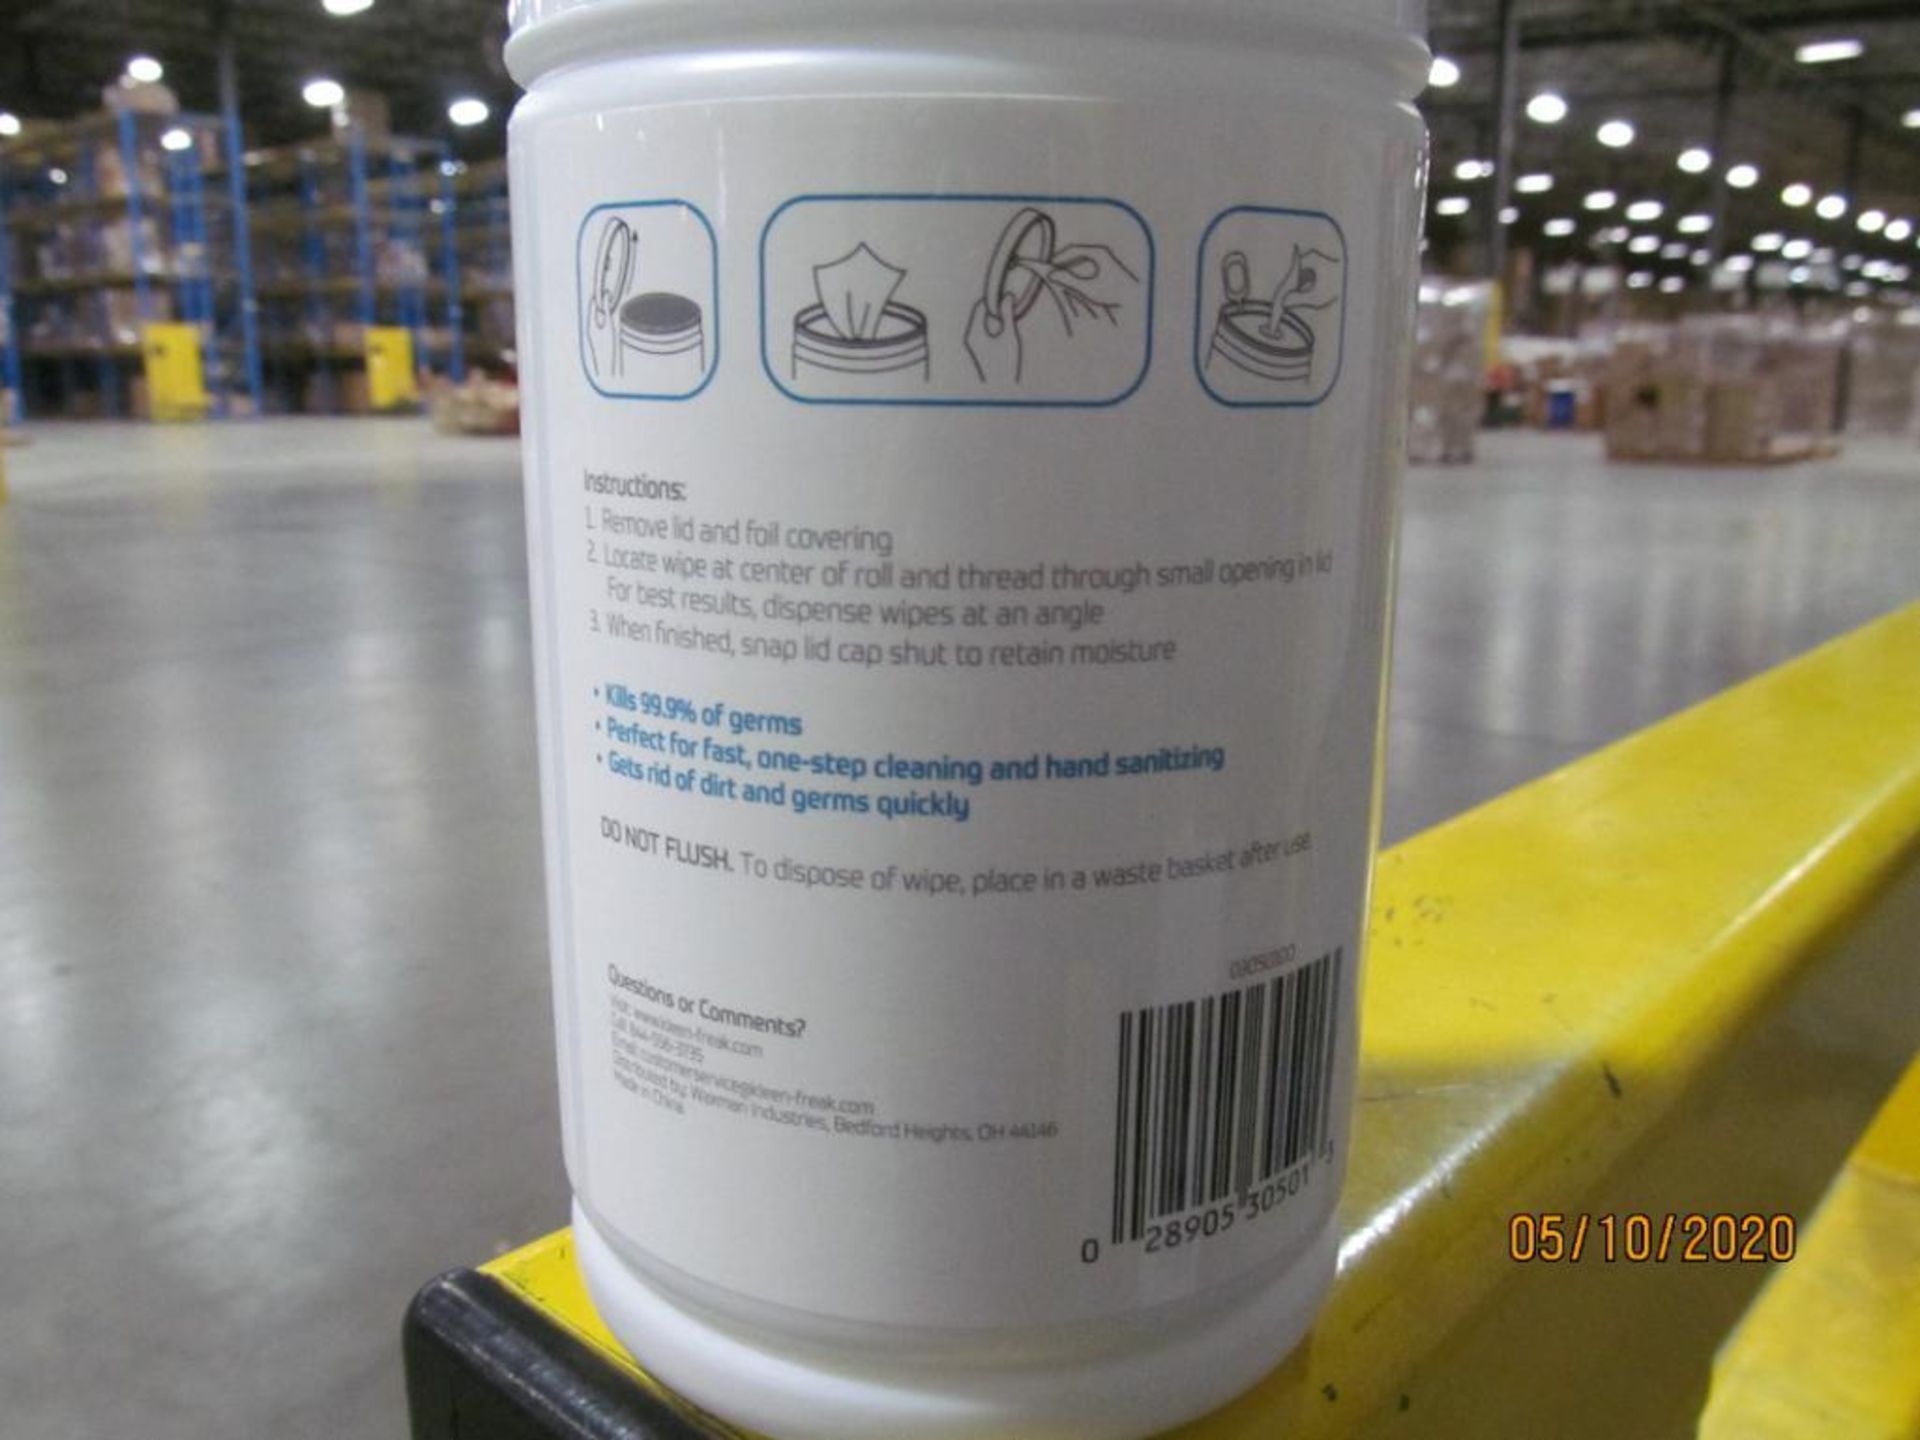 Lot of Waxman Kleen Freak Sanitizing Wipes consisting of 33,696 packages on 52 pallets. Each package - Image 2 of 11